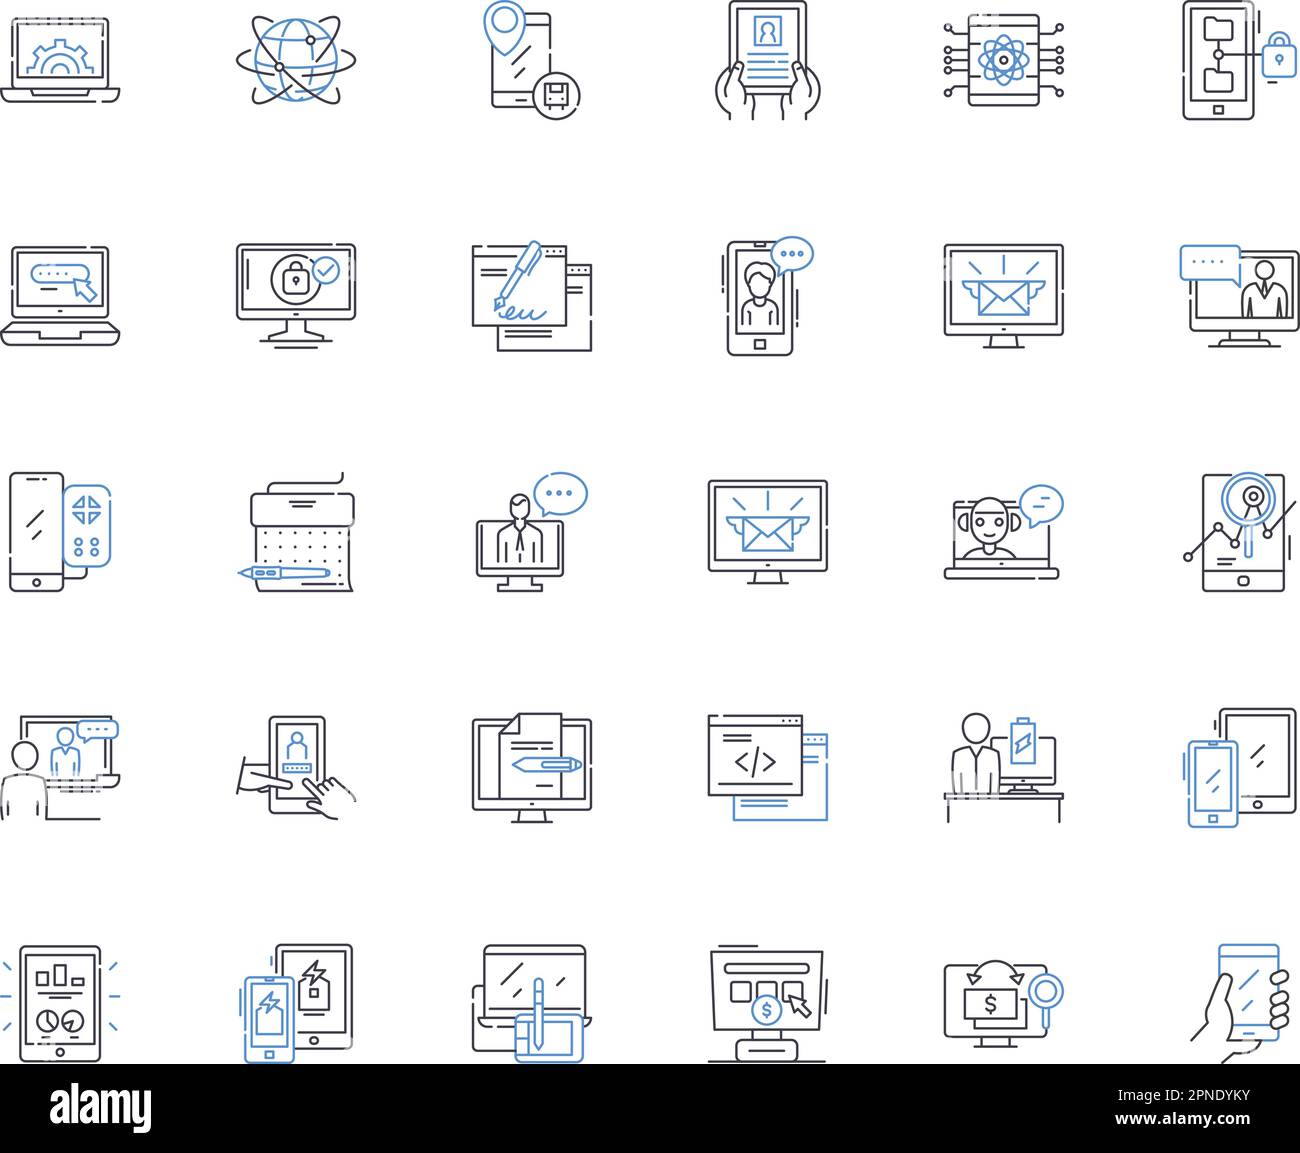 Machinery line icons collection. Automation, Assembly, Equipment ...